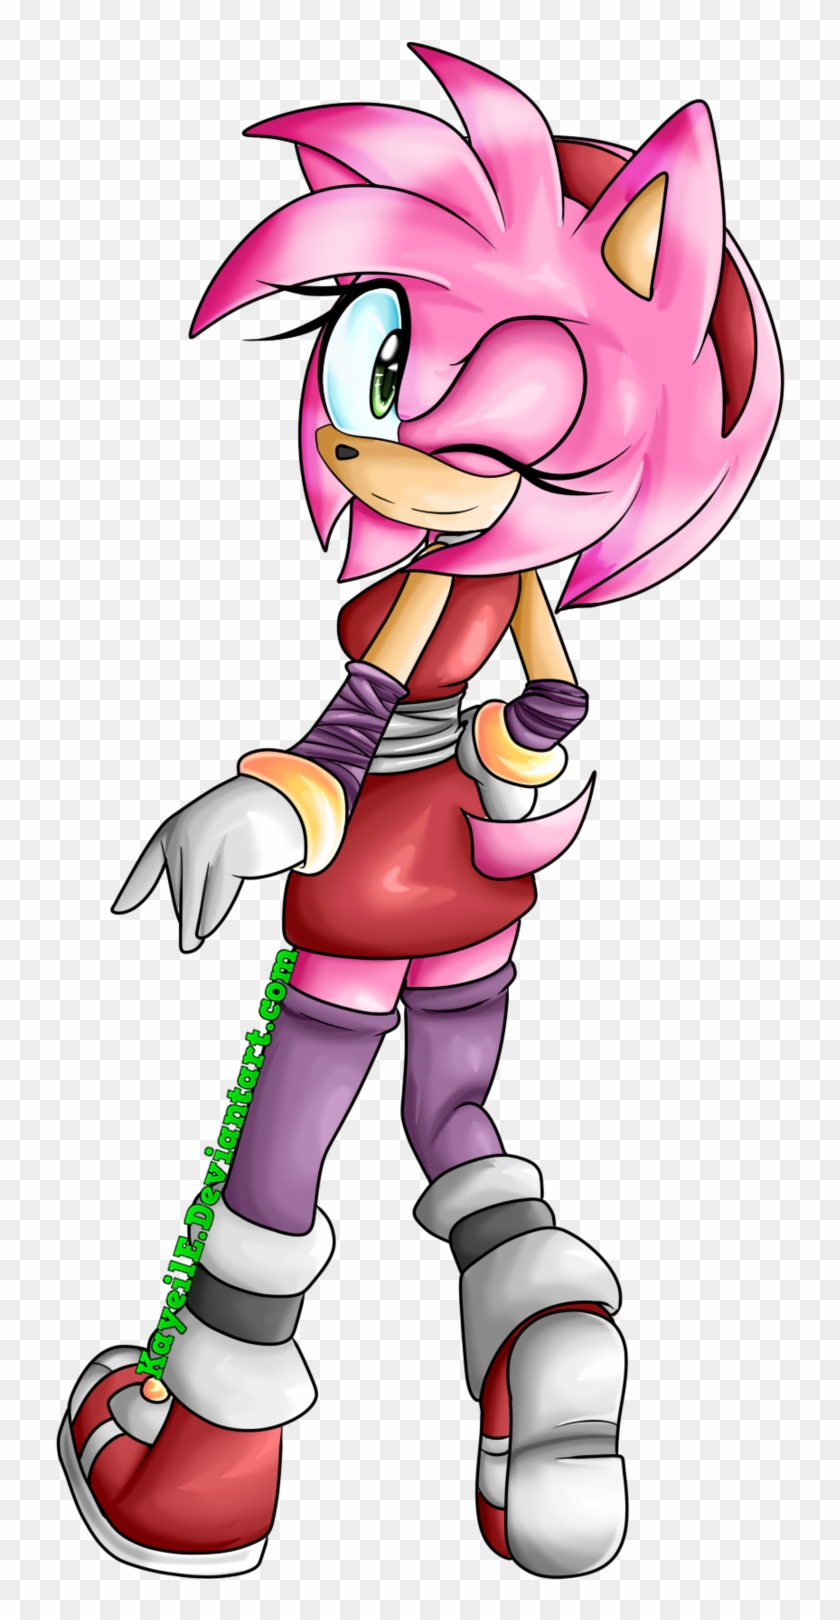 Amy Rose By Kayeile - Amy Rose Sonic Boom #352587